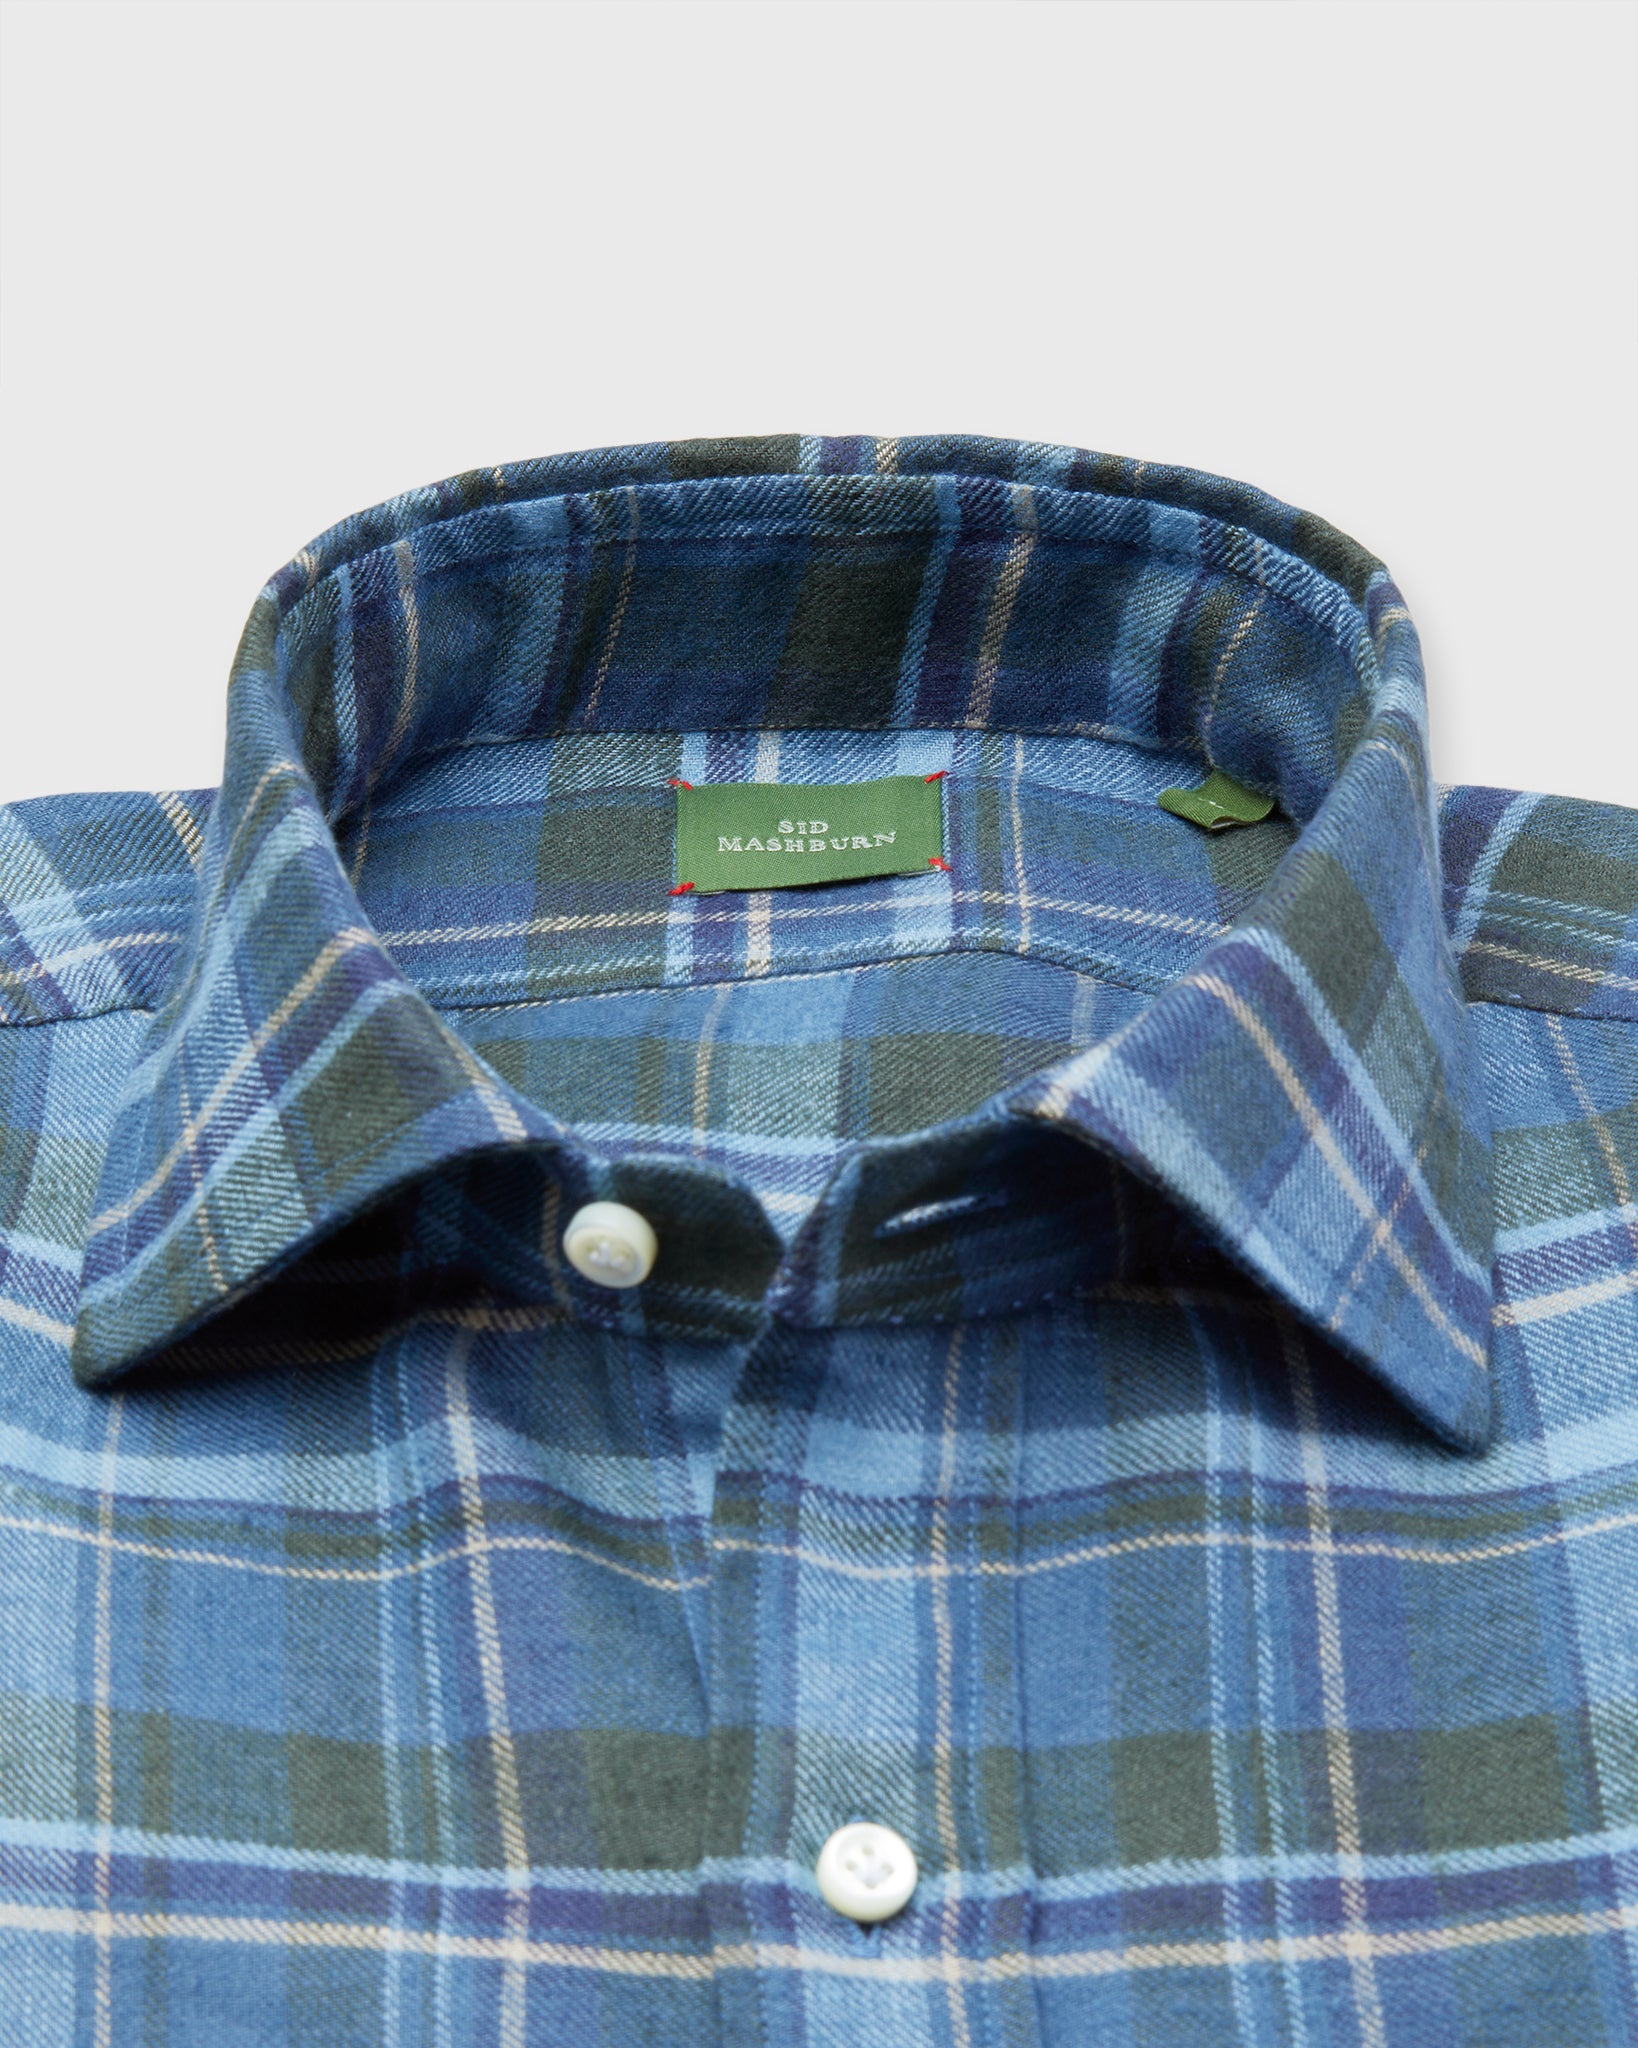 Otto Handmade Sport Shirt in Slate/Olive/Oat Brushed Plaid Flannel